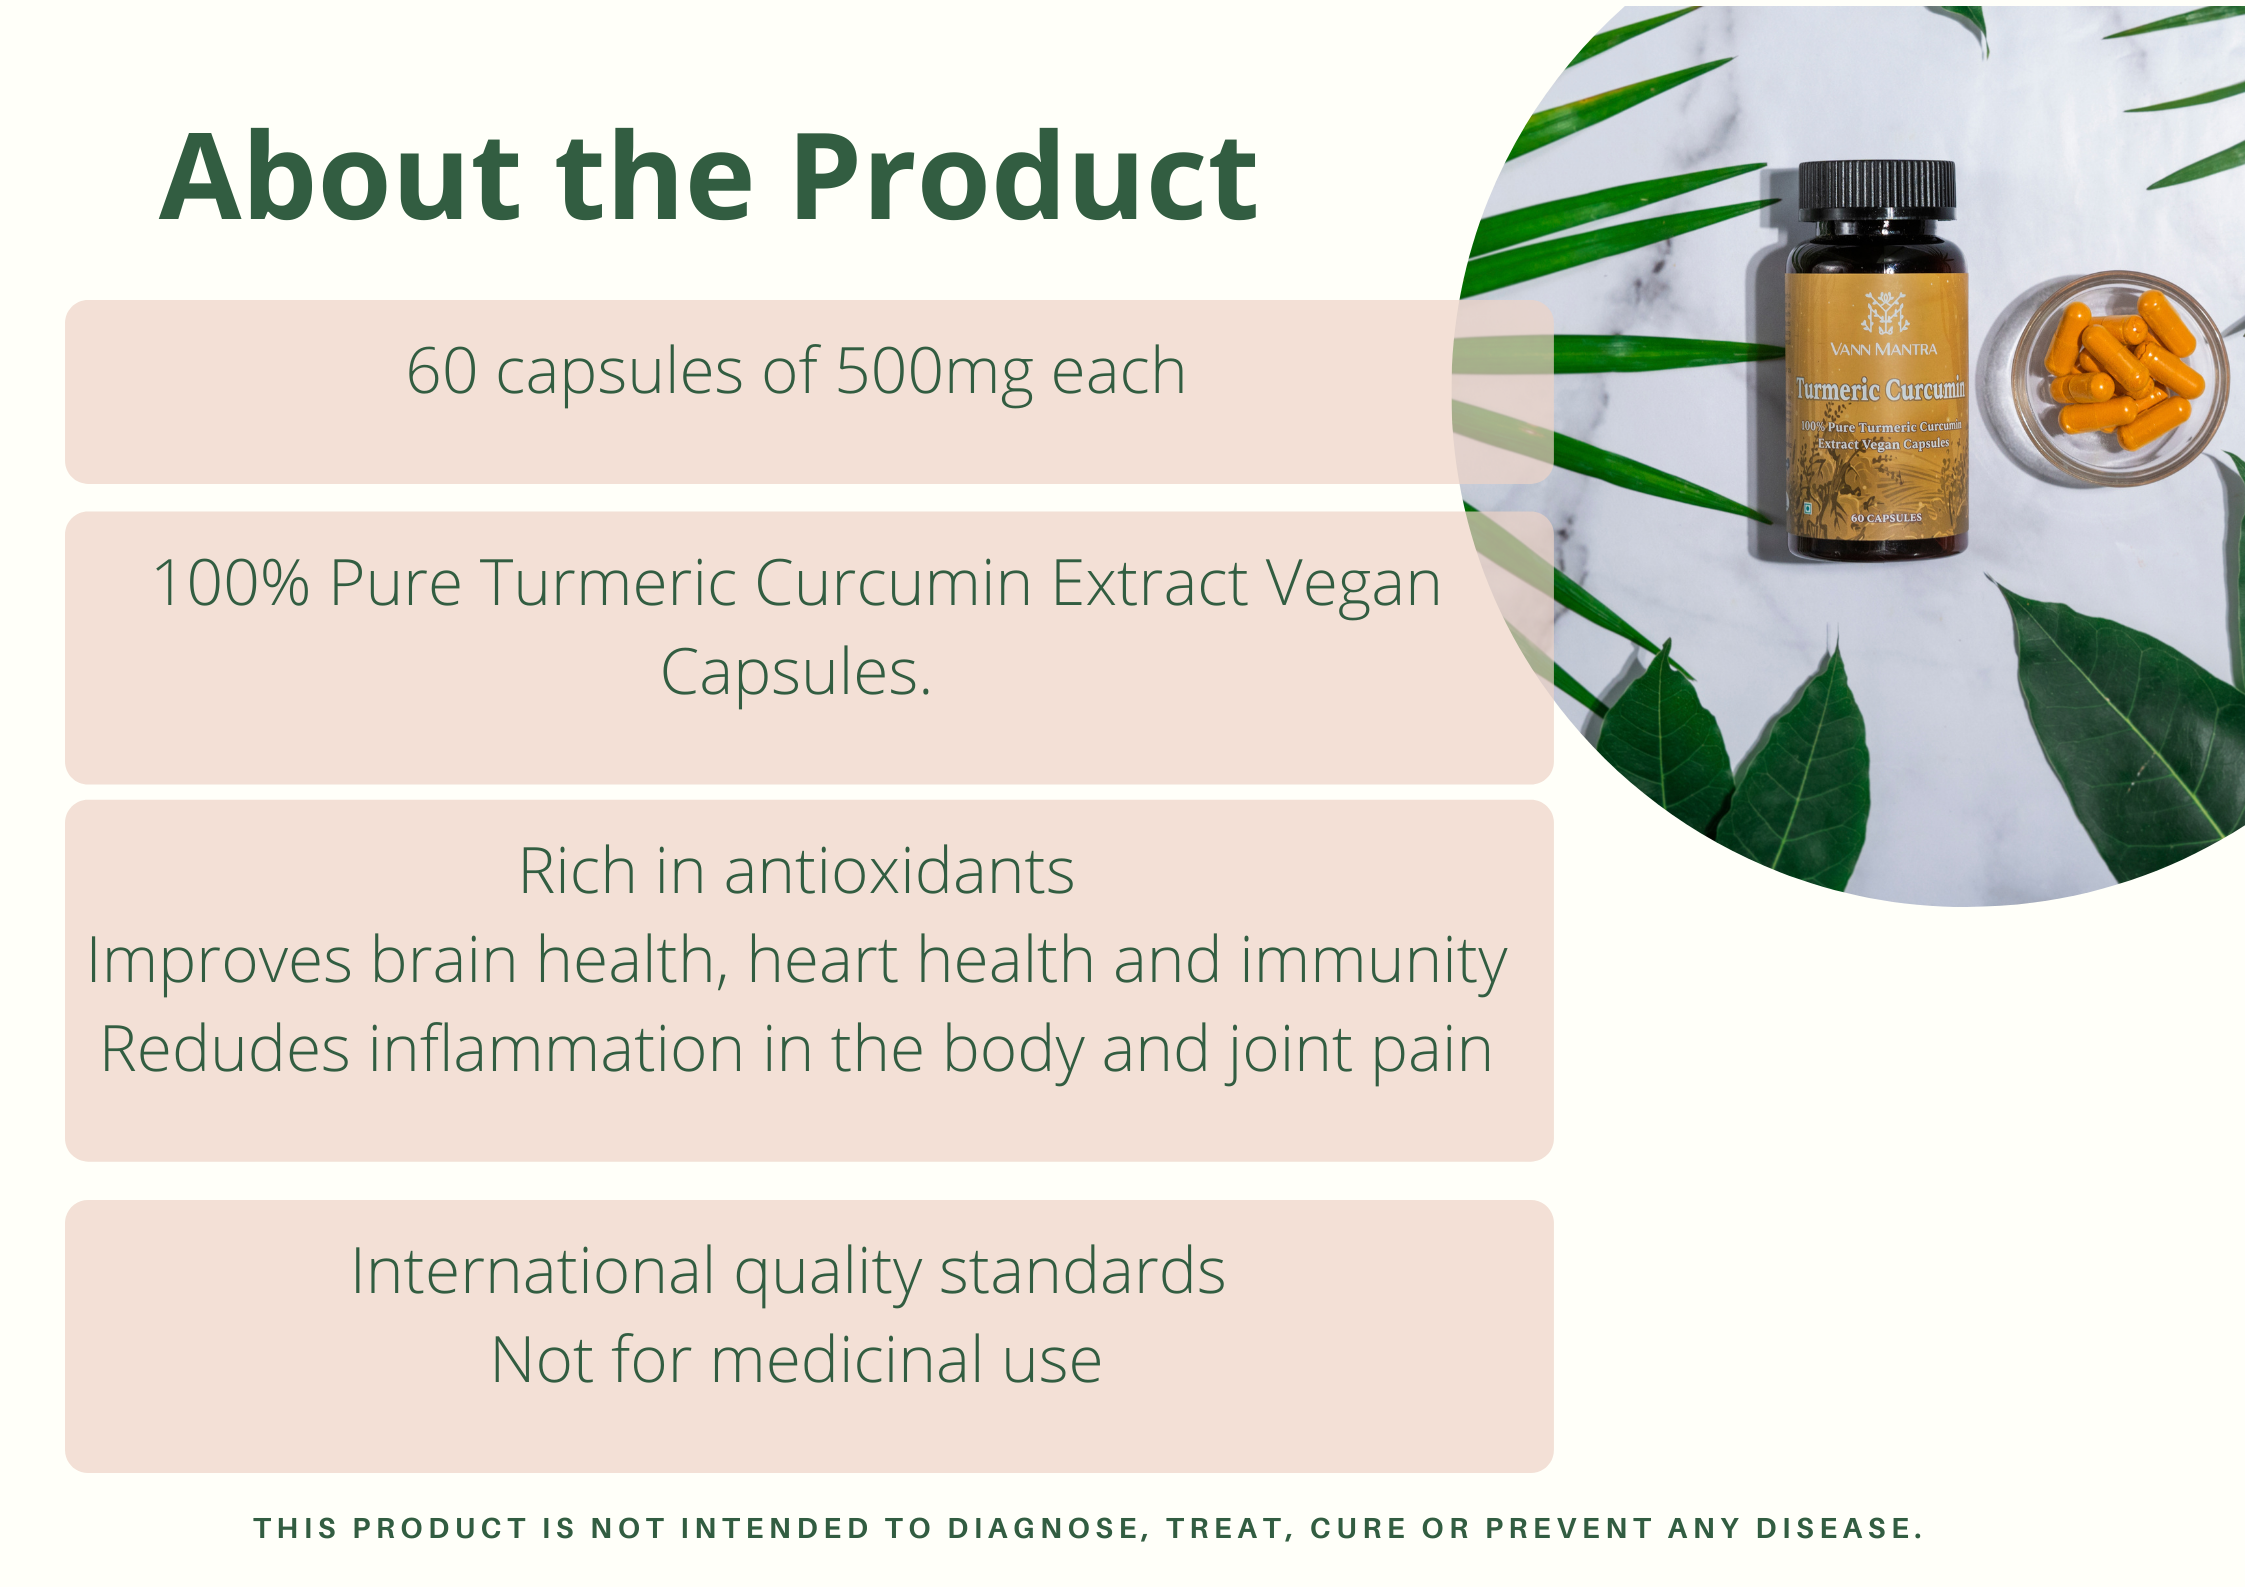 Infographic explaining the features and benefits of Turmeric Curcumin Capsules.